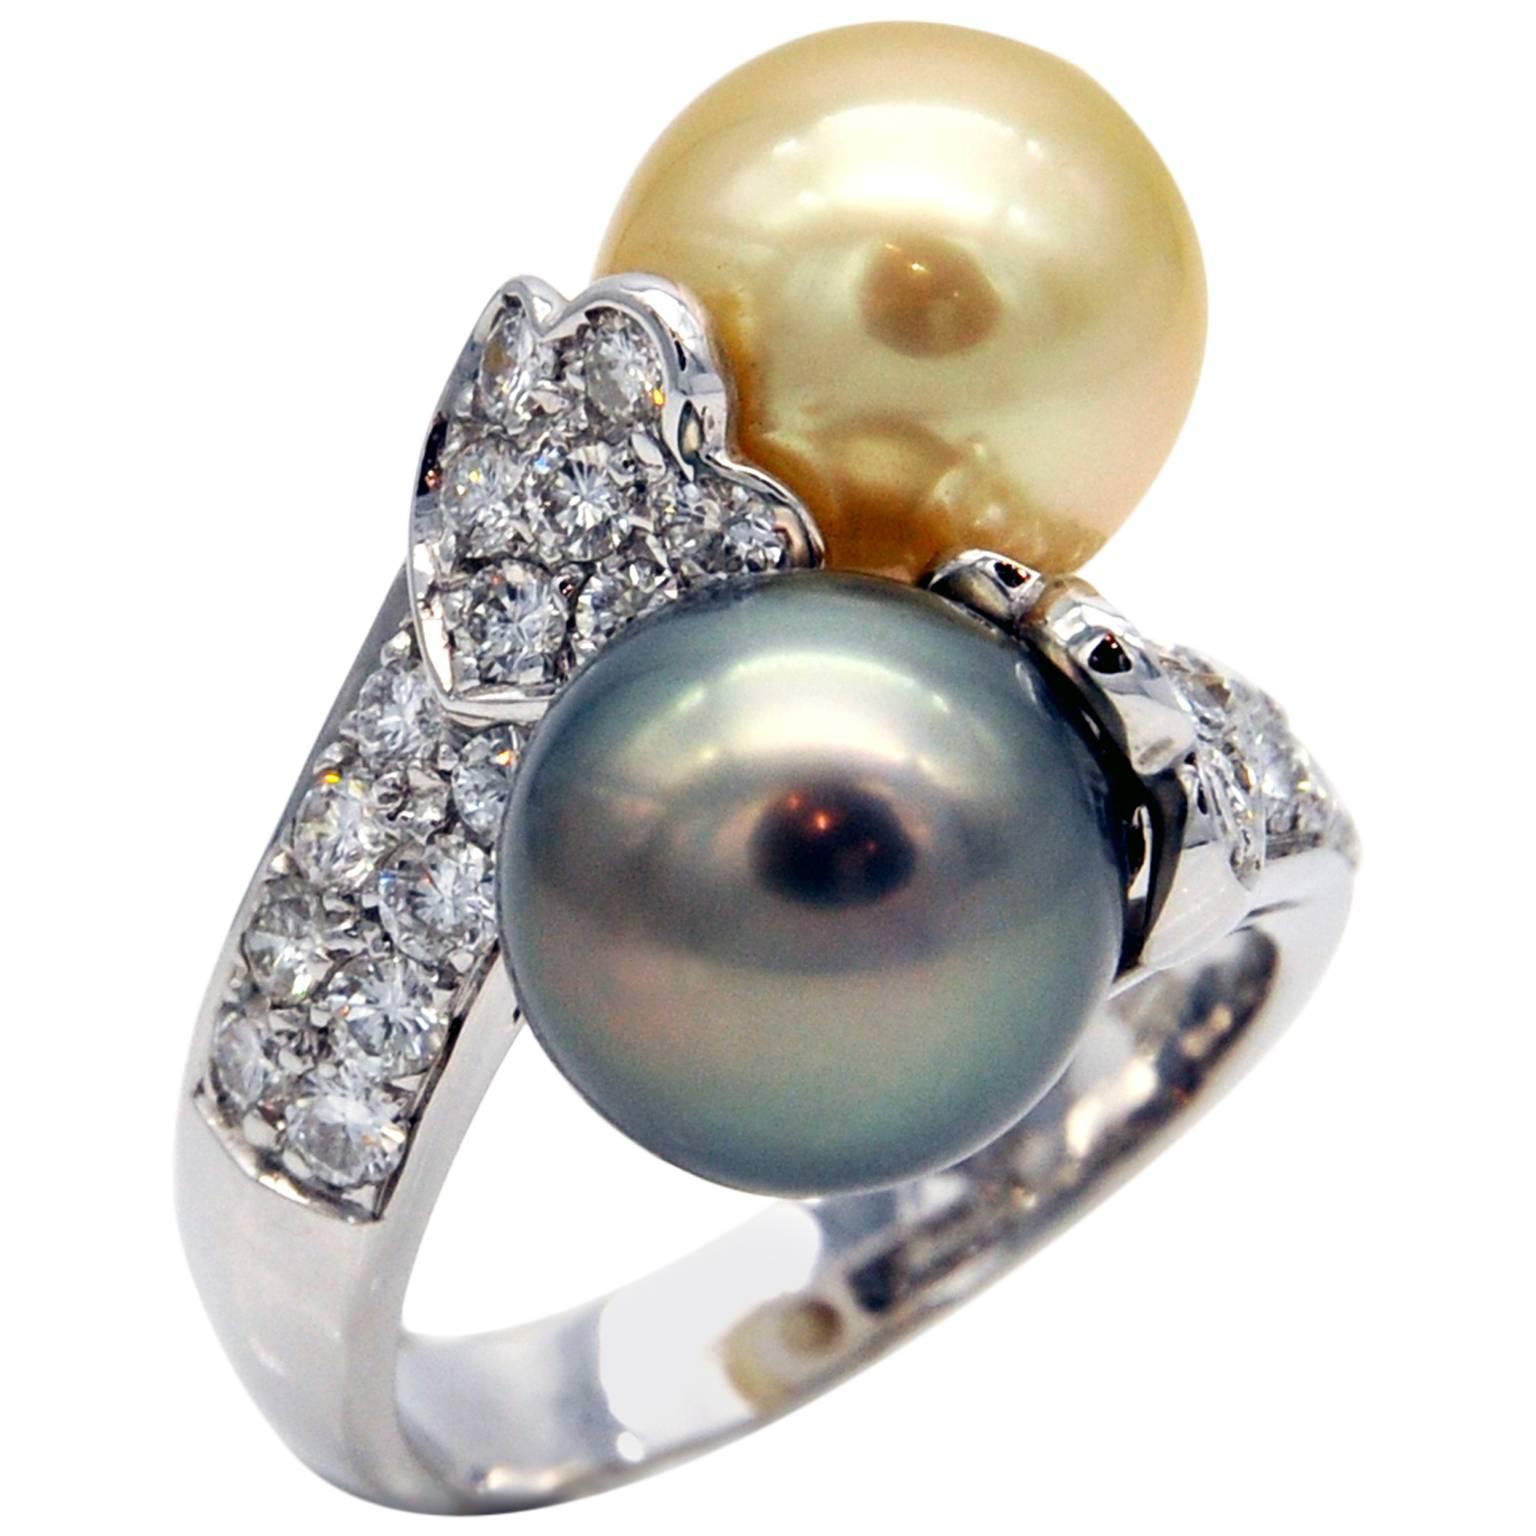 South Sea and Black Pearl Diamond Gold "Toi et Moi" Ring